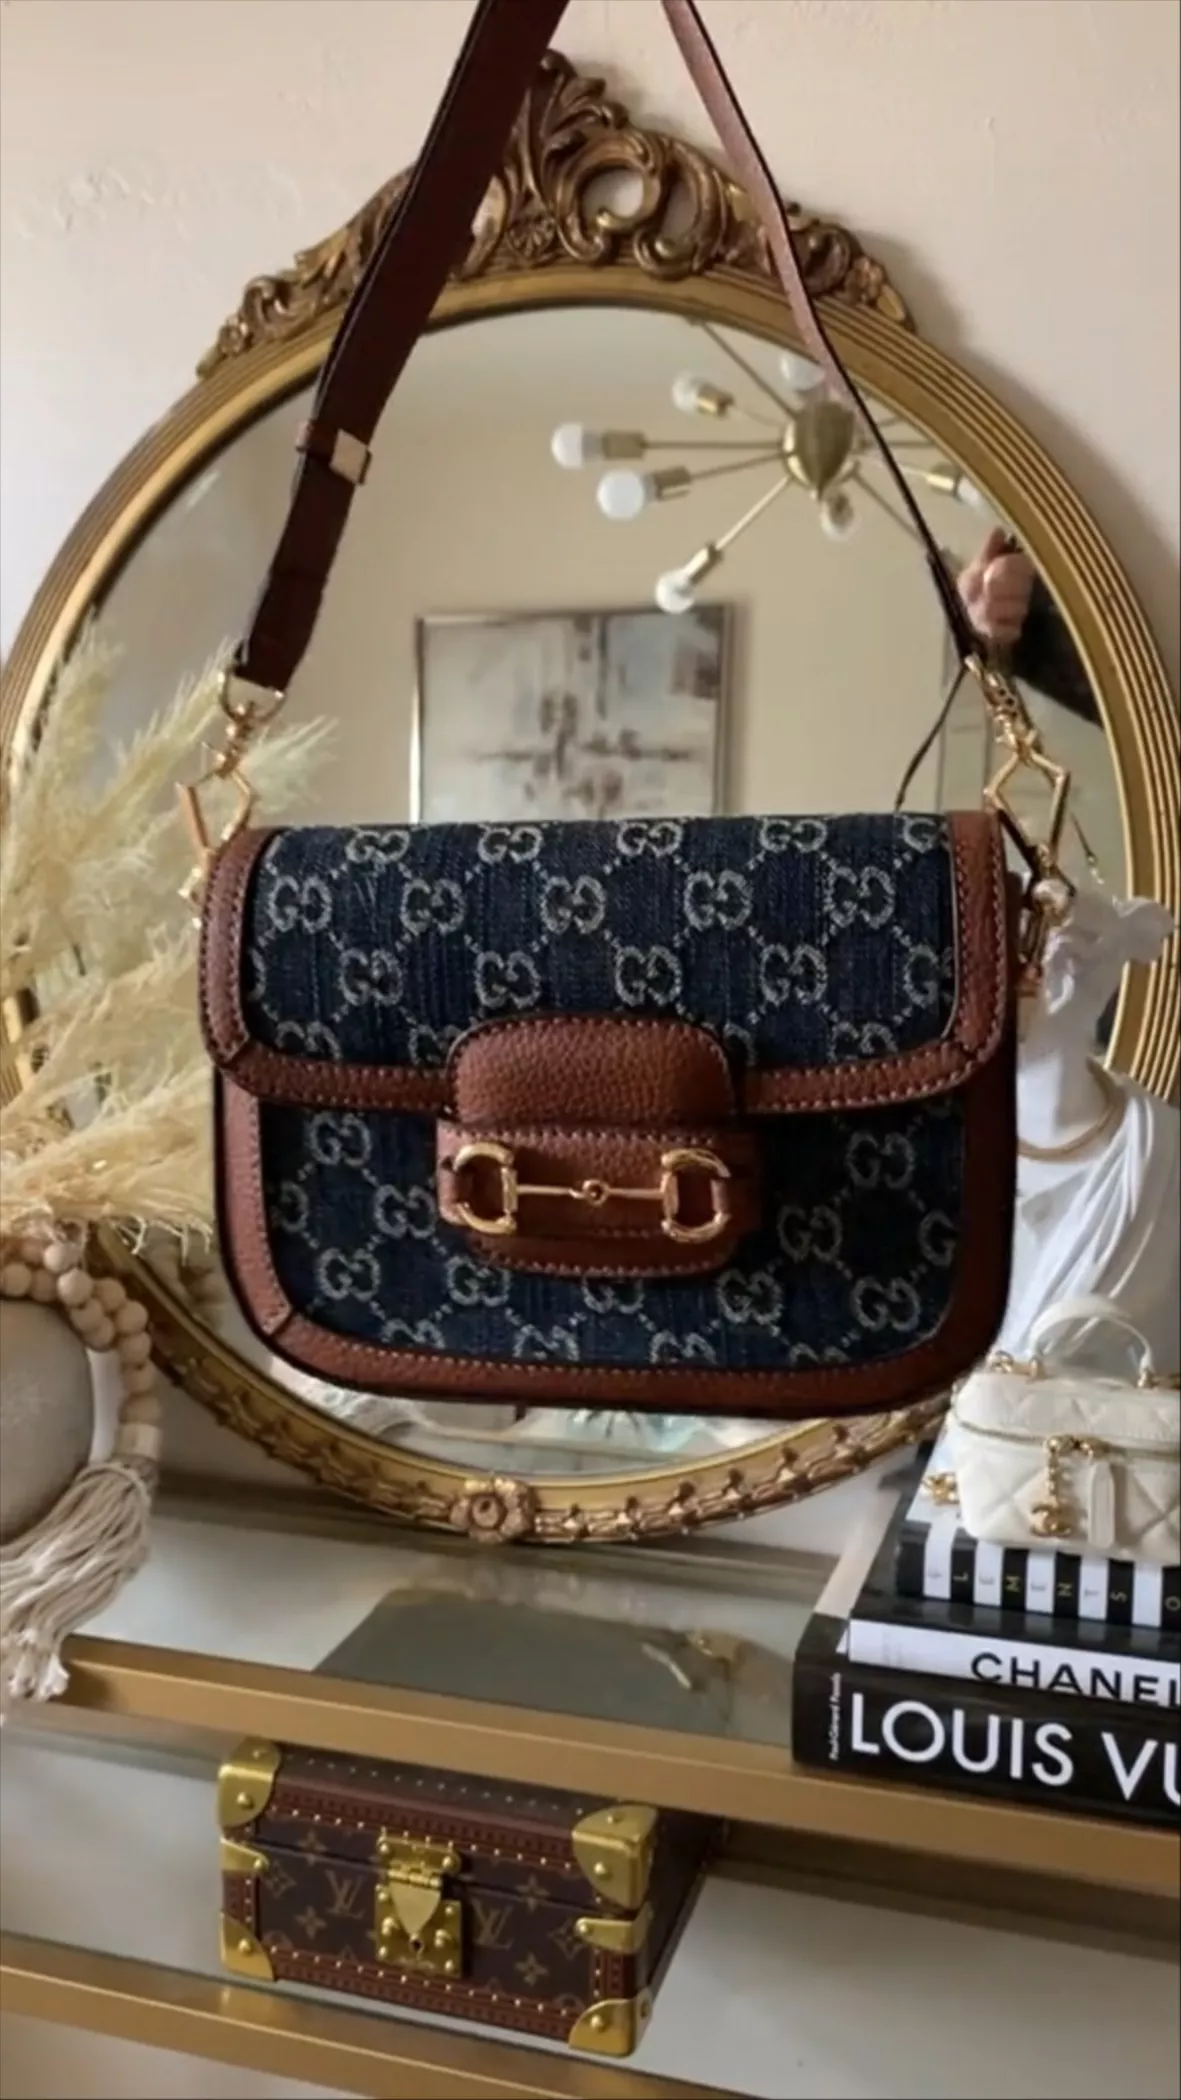 Looking For - Gucci x Adidas mini bag : r/DHgate